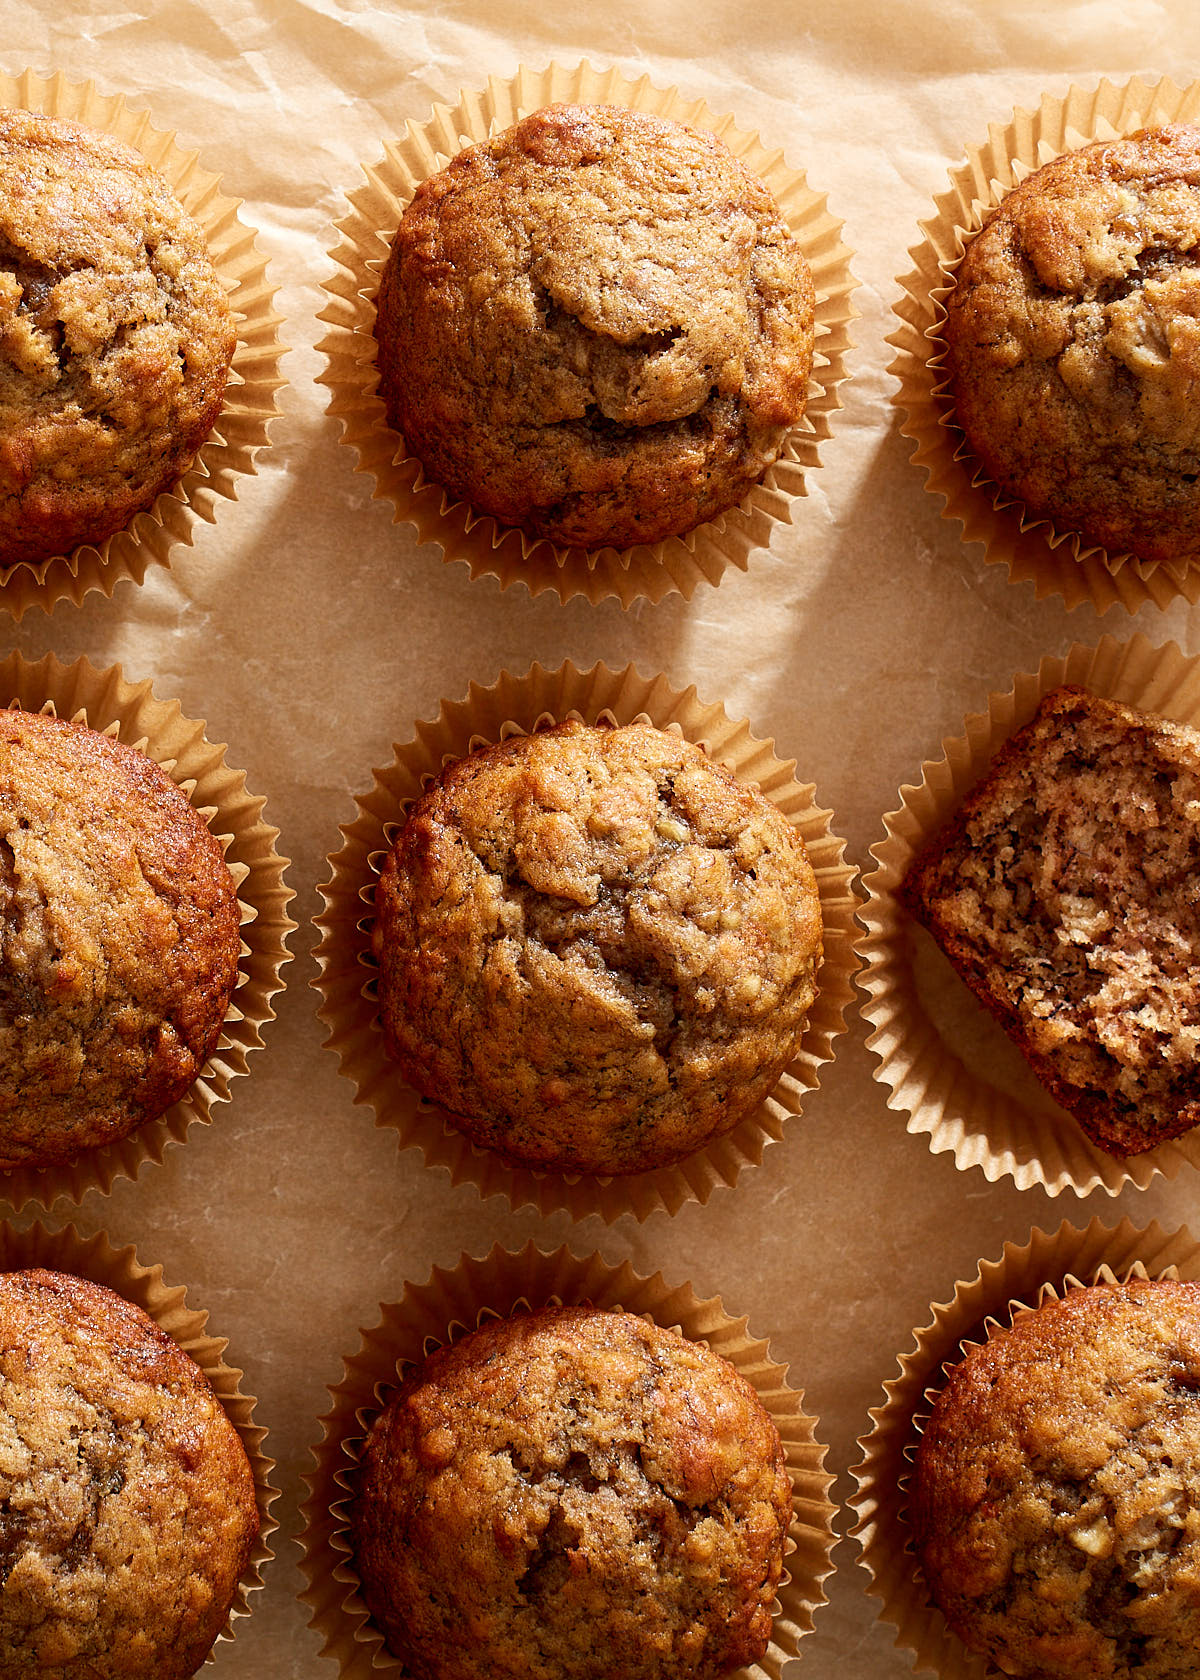 Rows of banana muffins, fresh from the oven.